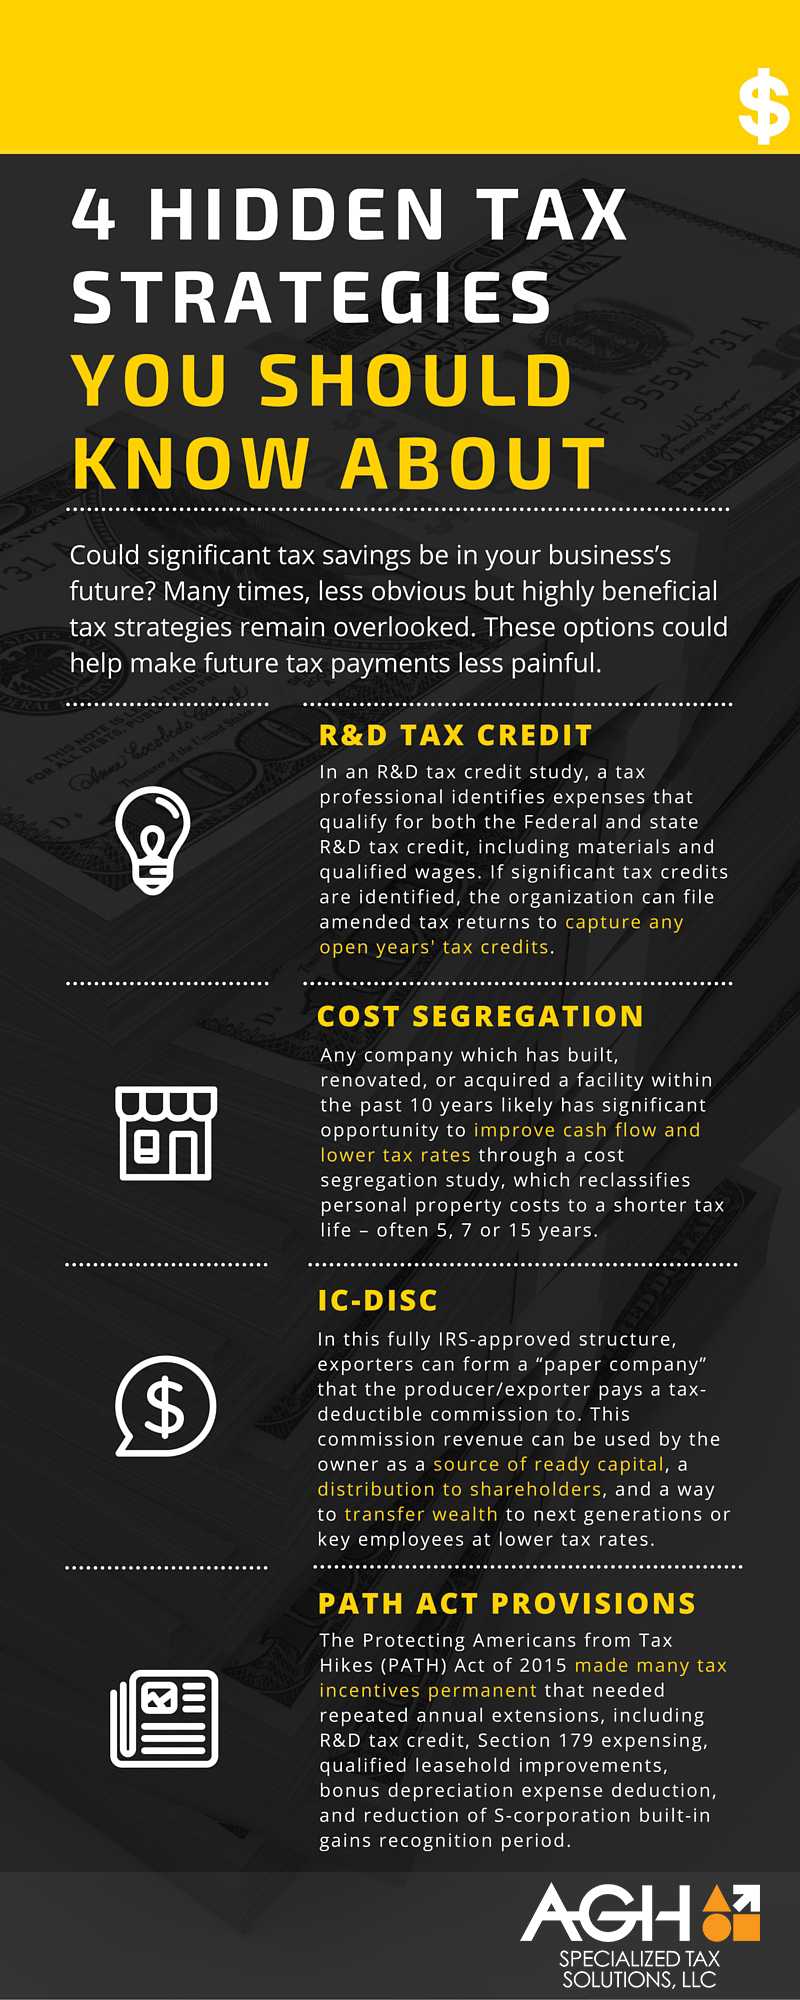 4 tax strategies that could save you money